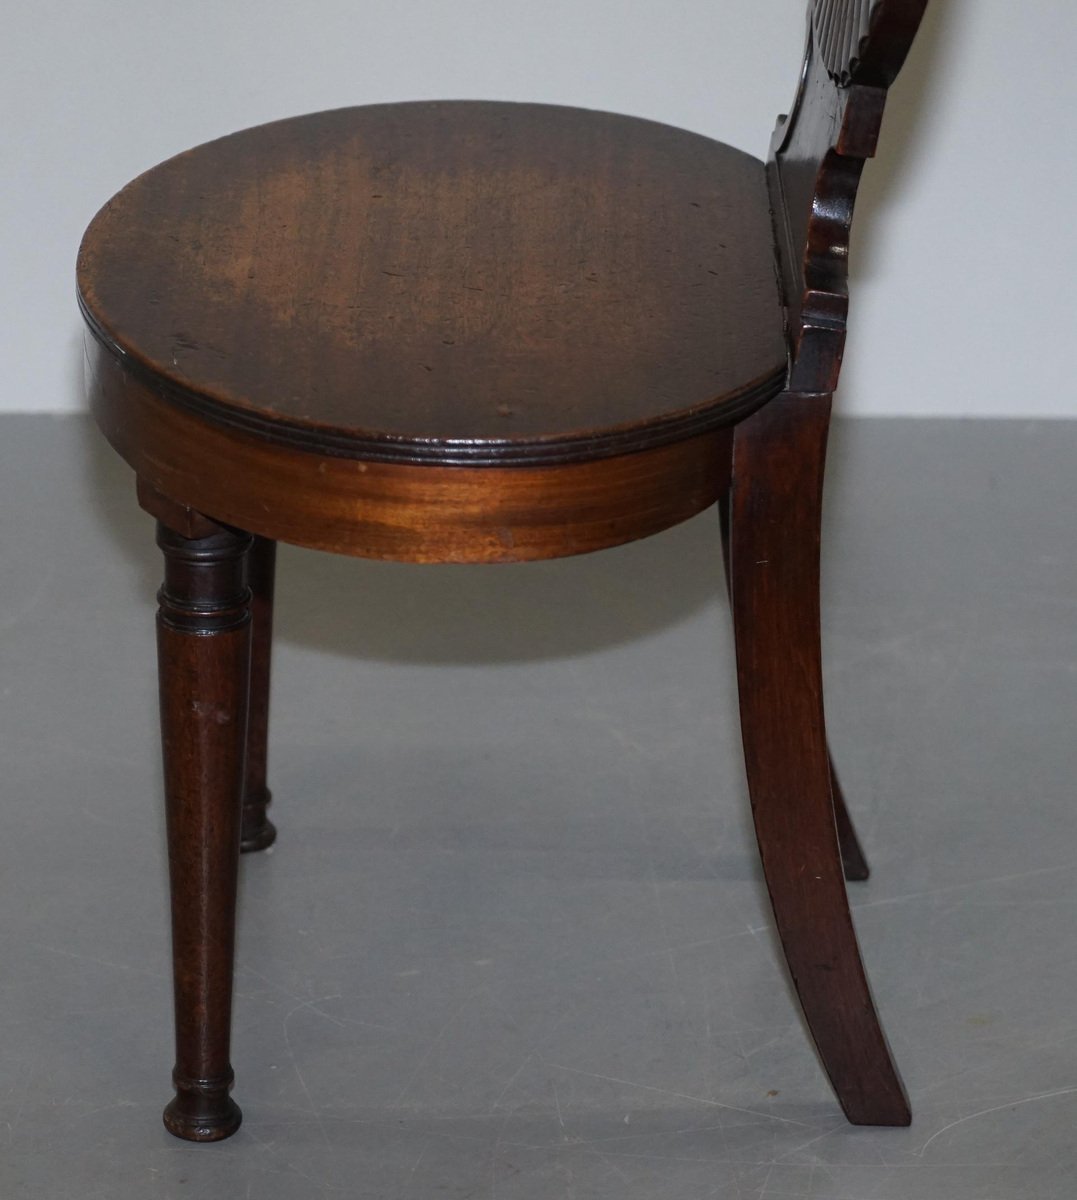 georgian shell back hall chair from gillows of lancaster 1780s GZP-1007024